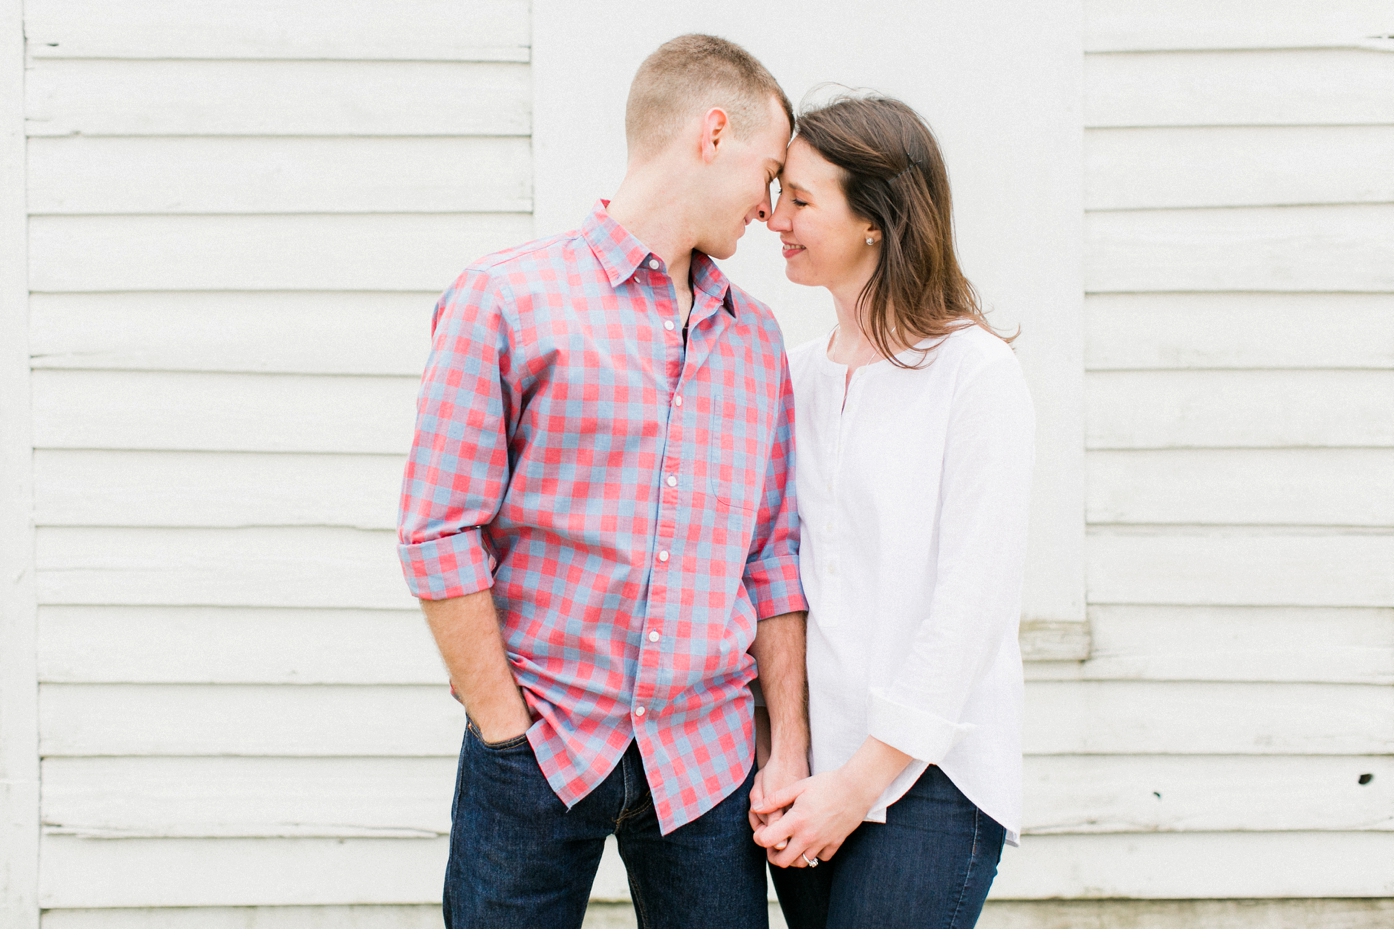 Private Farm Engagement Session in Franklin VA by Alisandra Photography